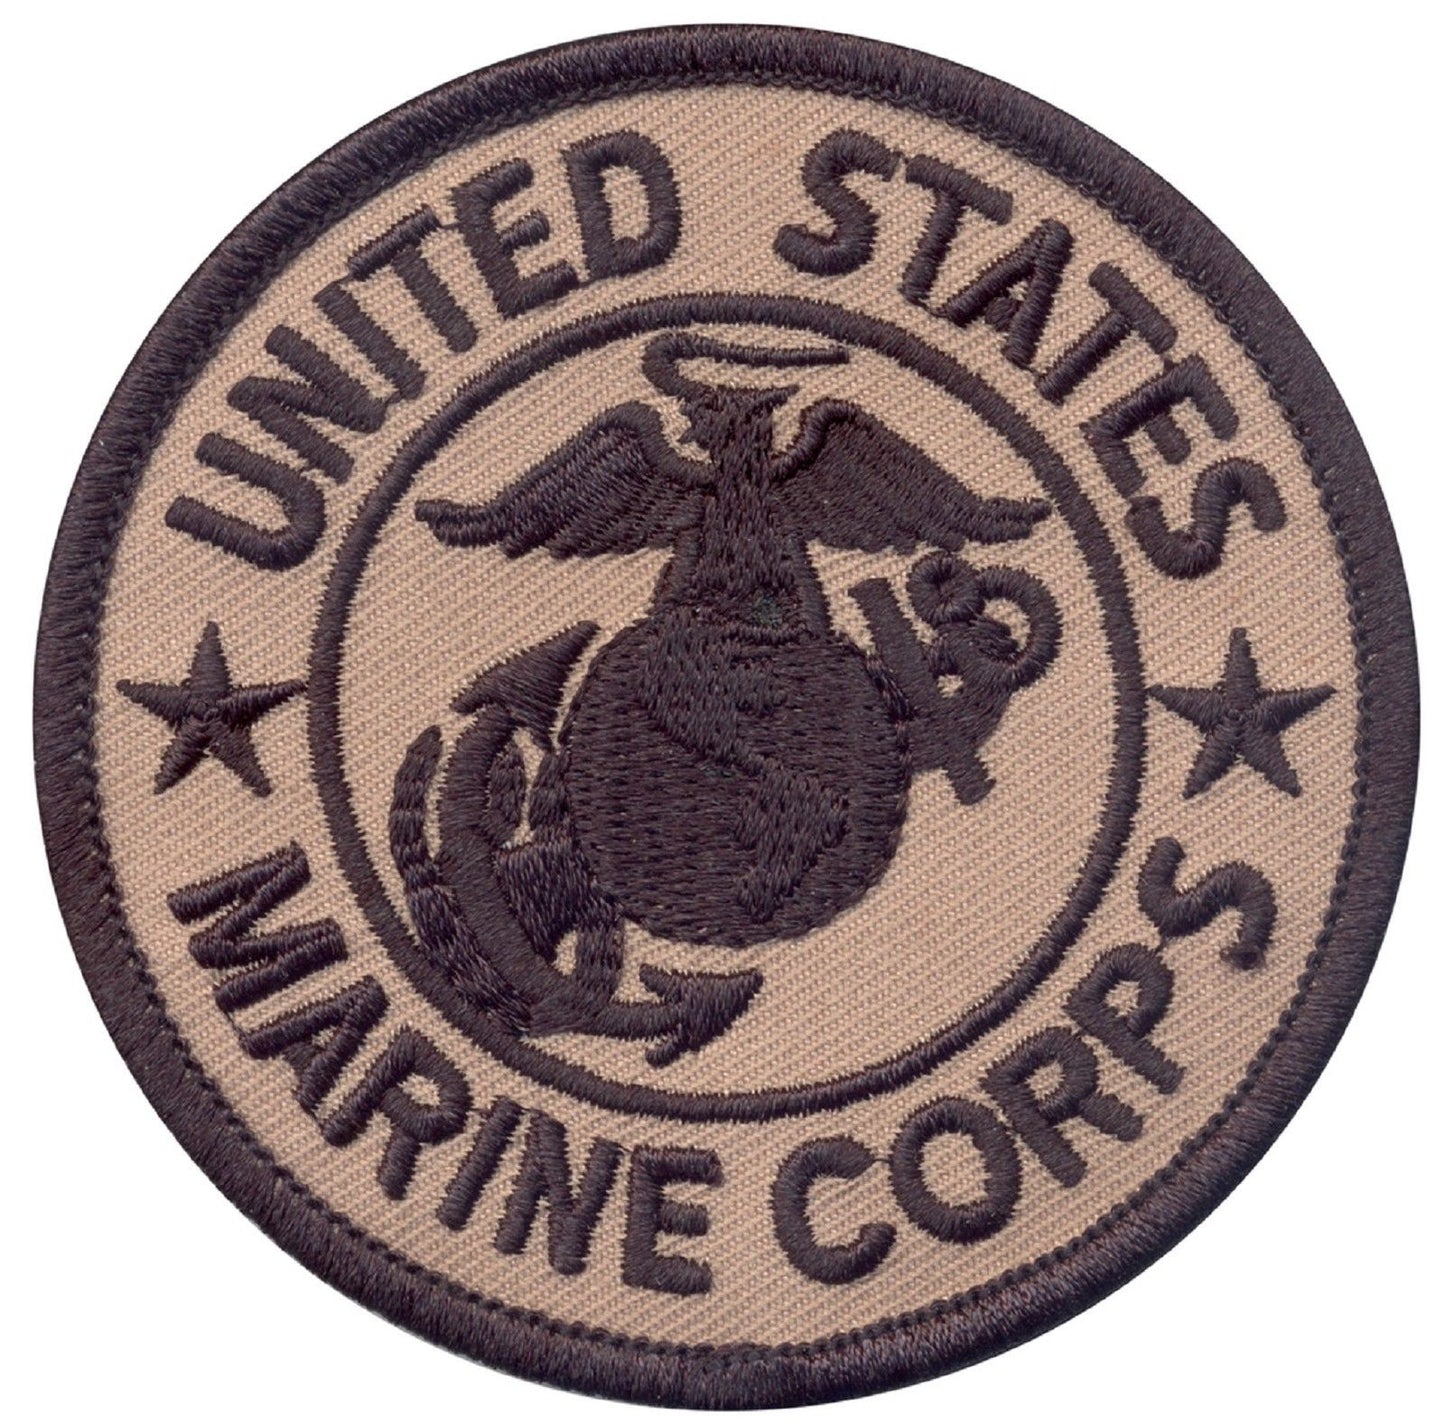 Coyote Brown United States Marine Corps 3" Velcro Patch Rothco 1585